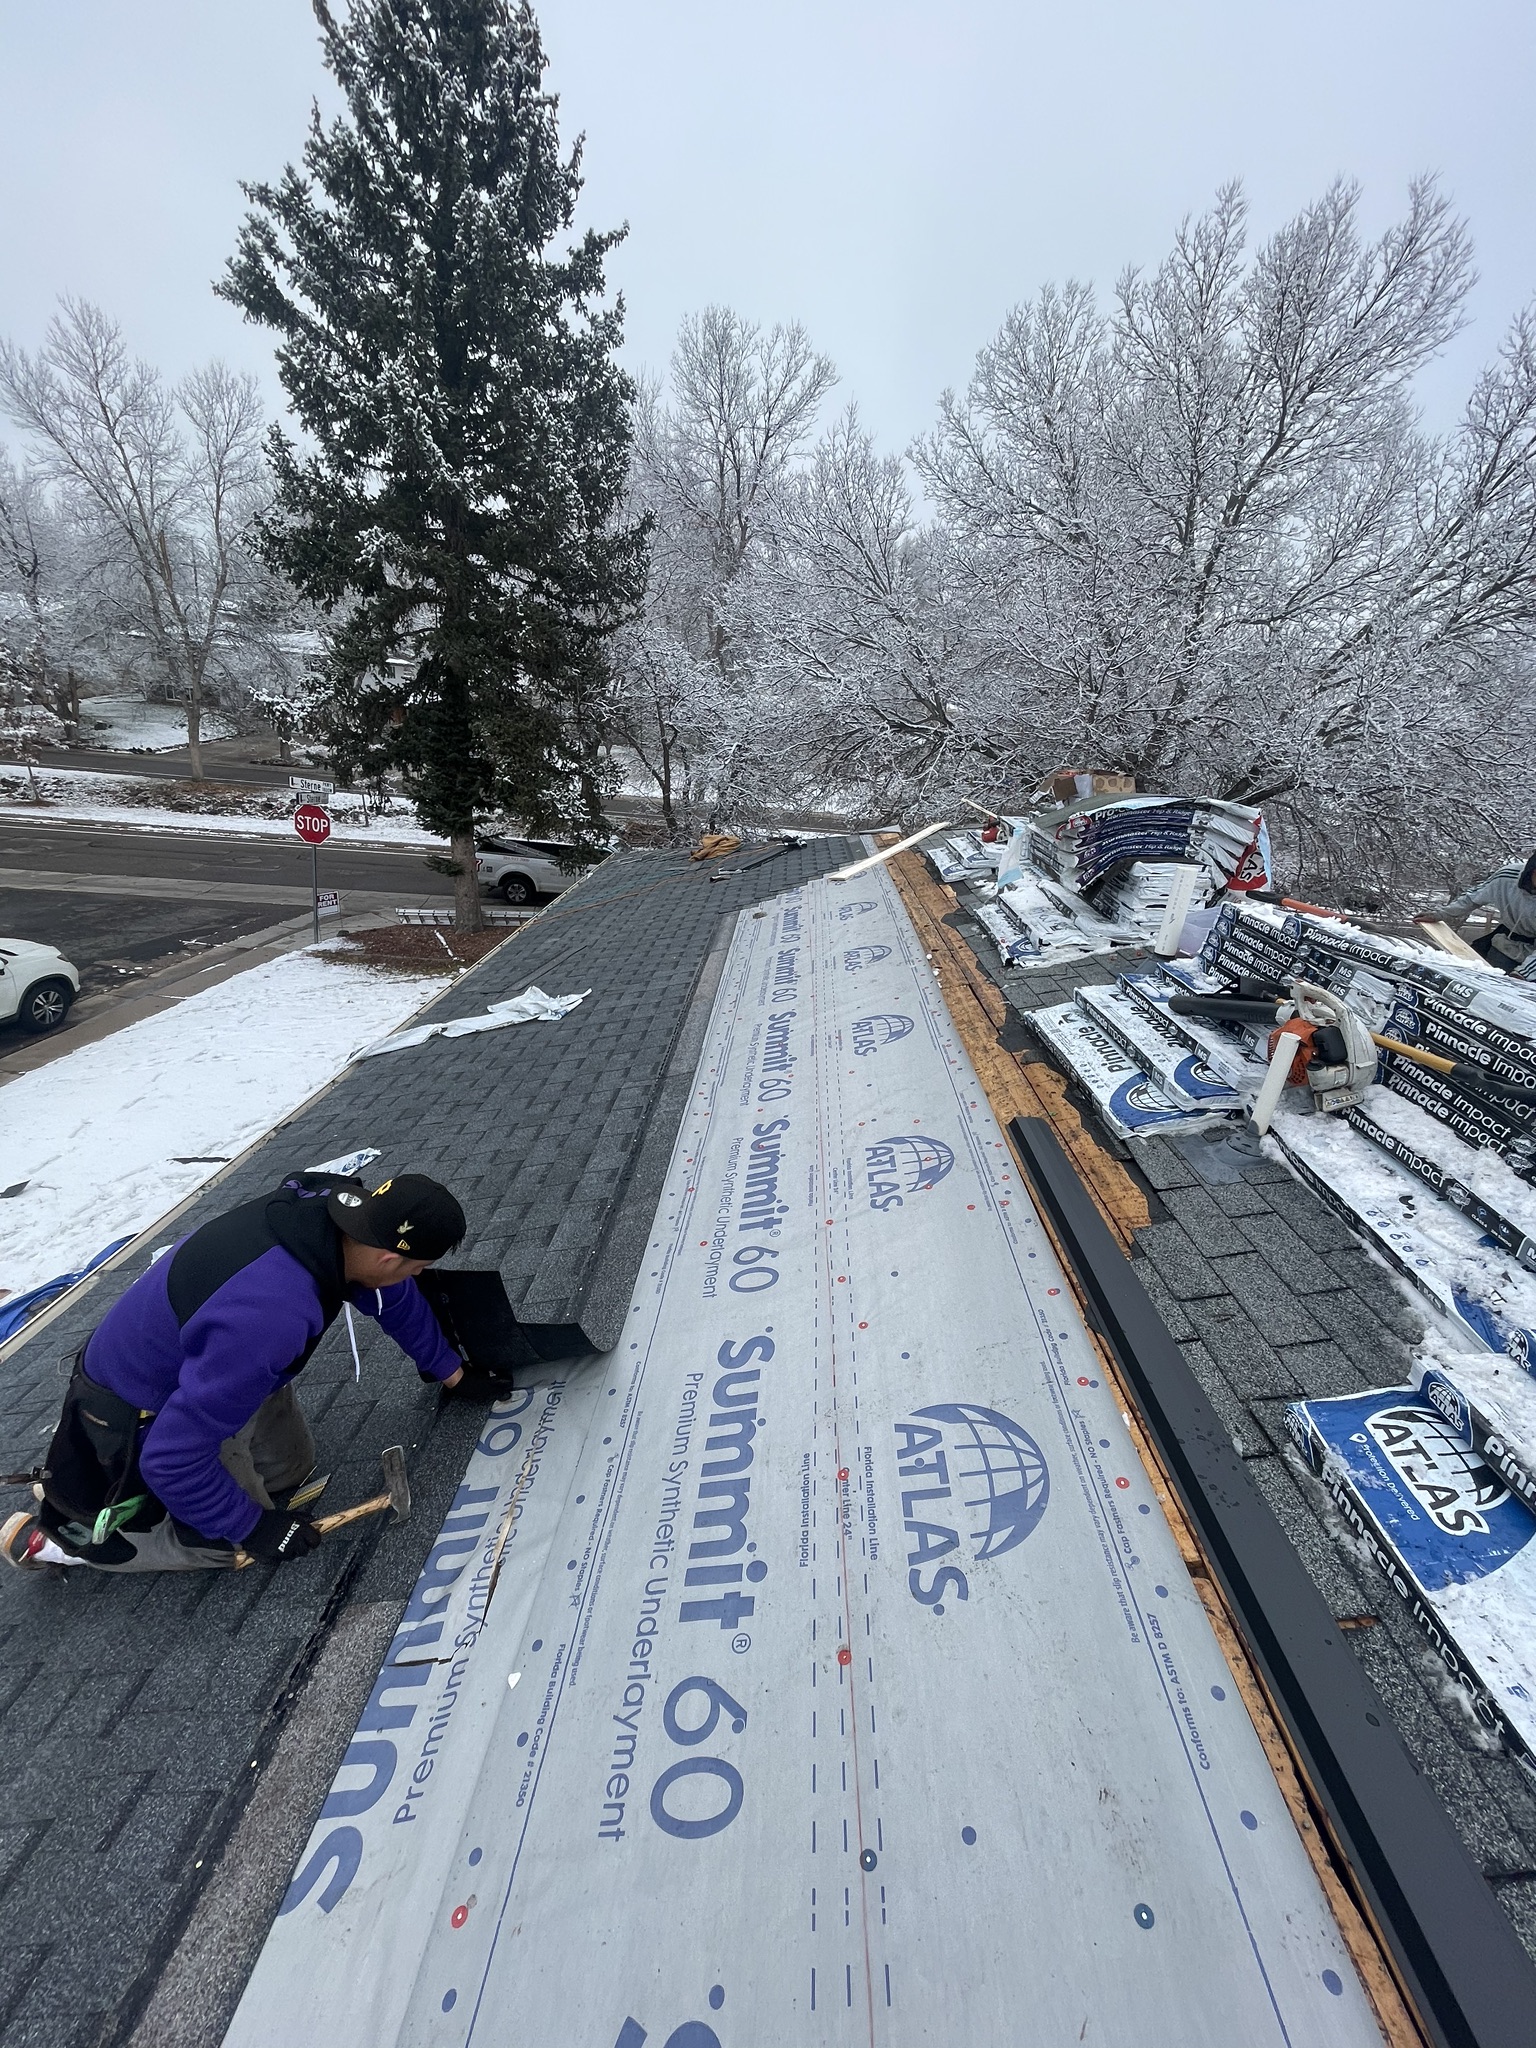 Hail damaged roof replacement in progress